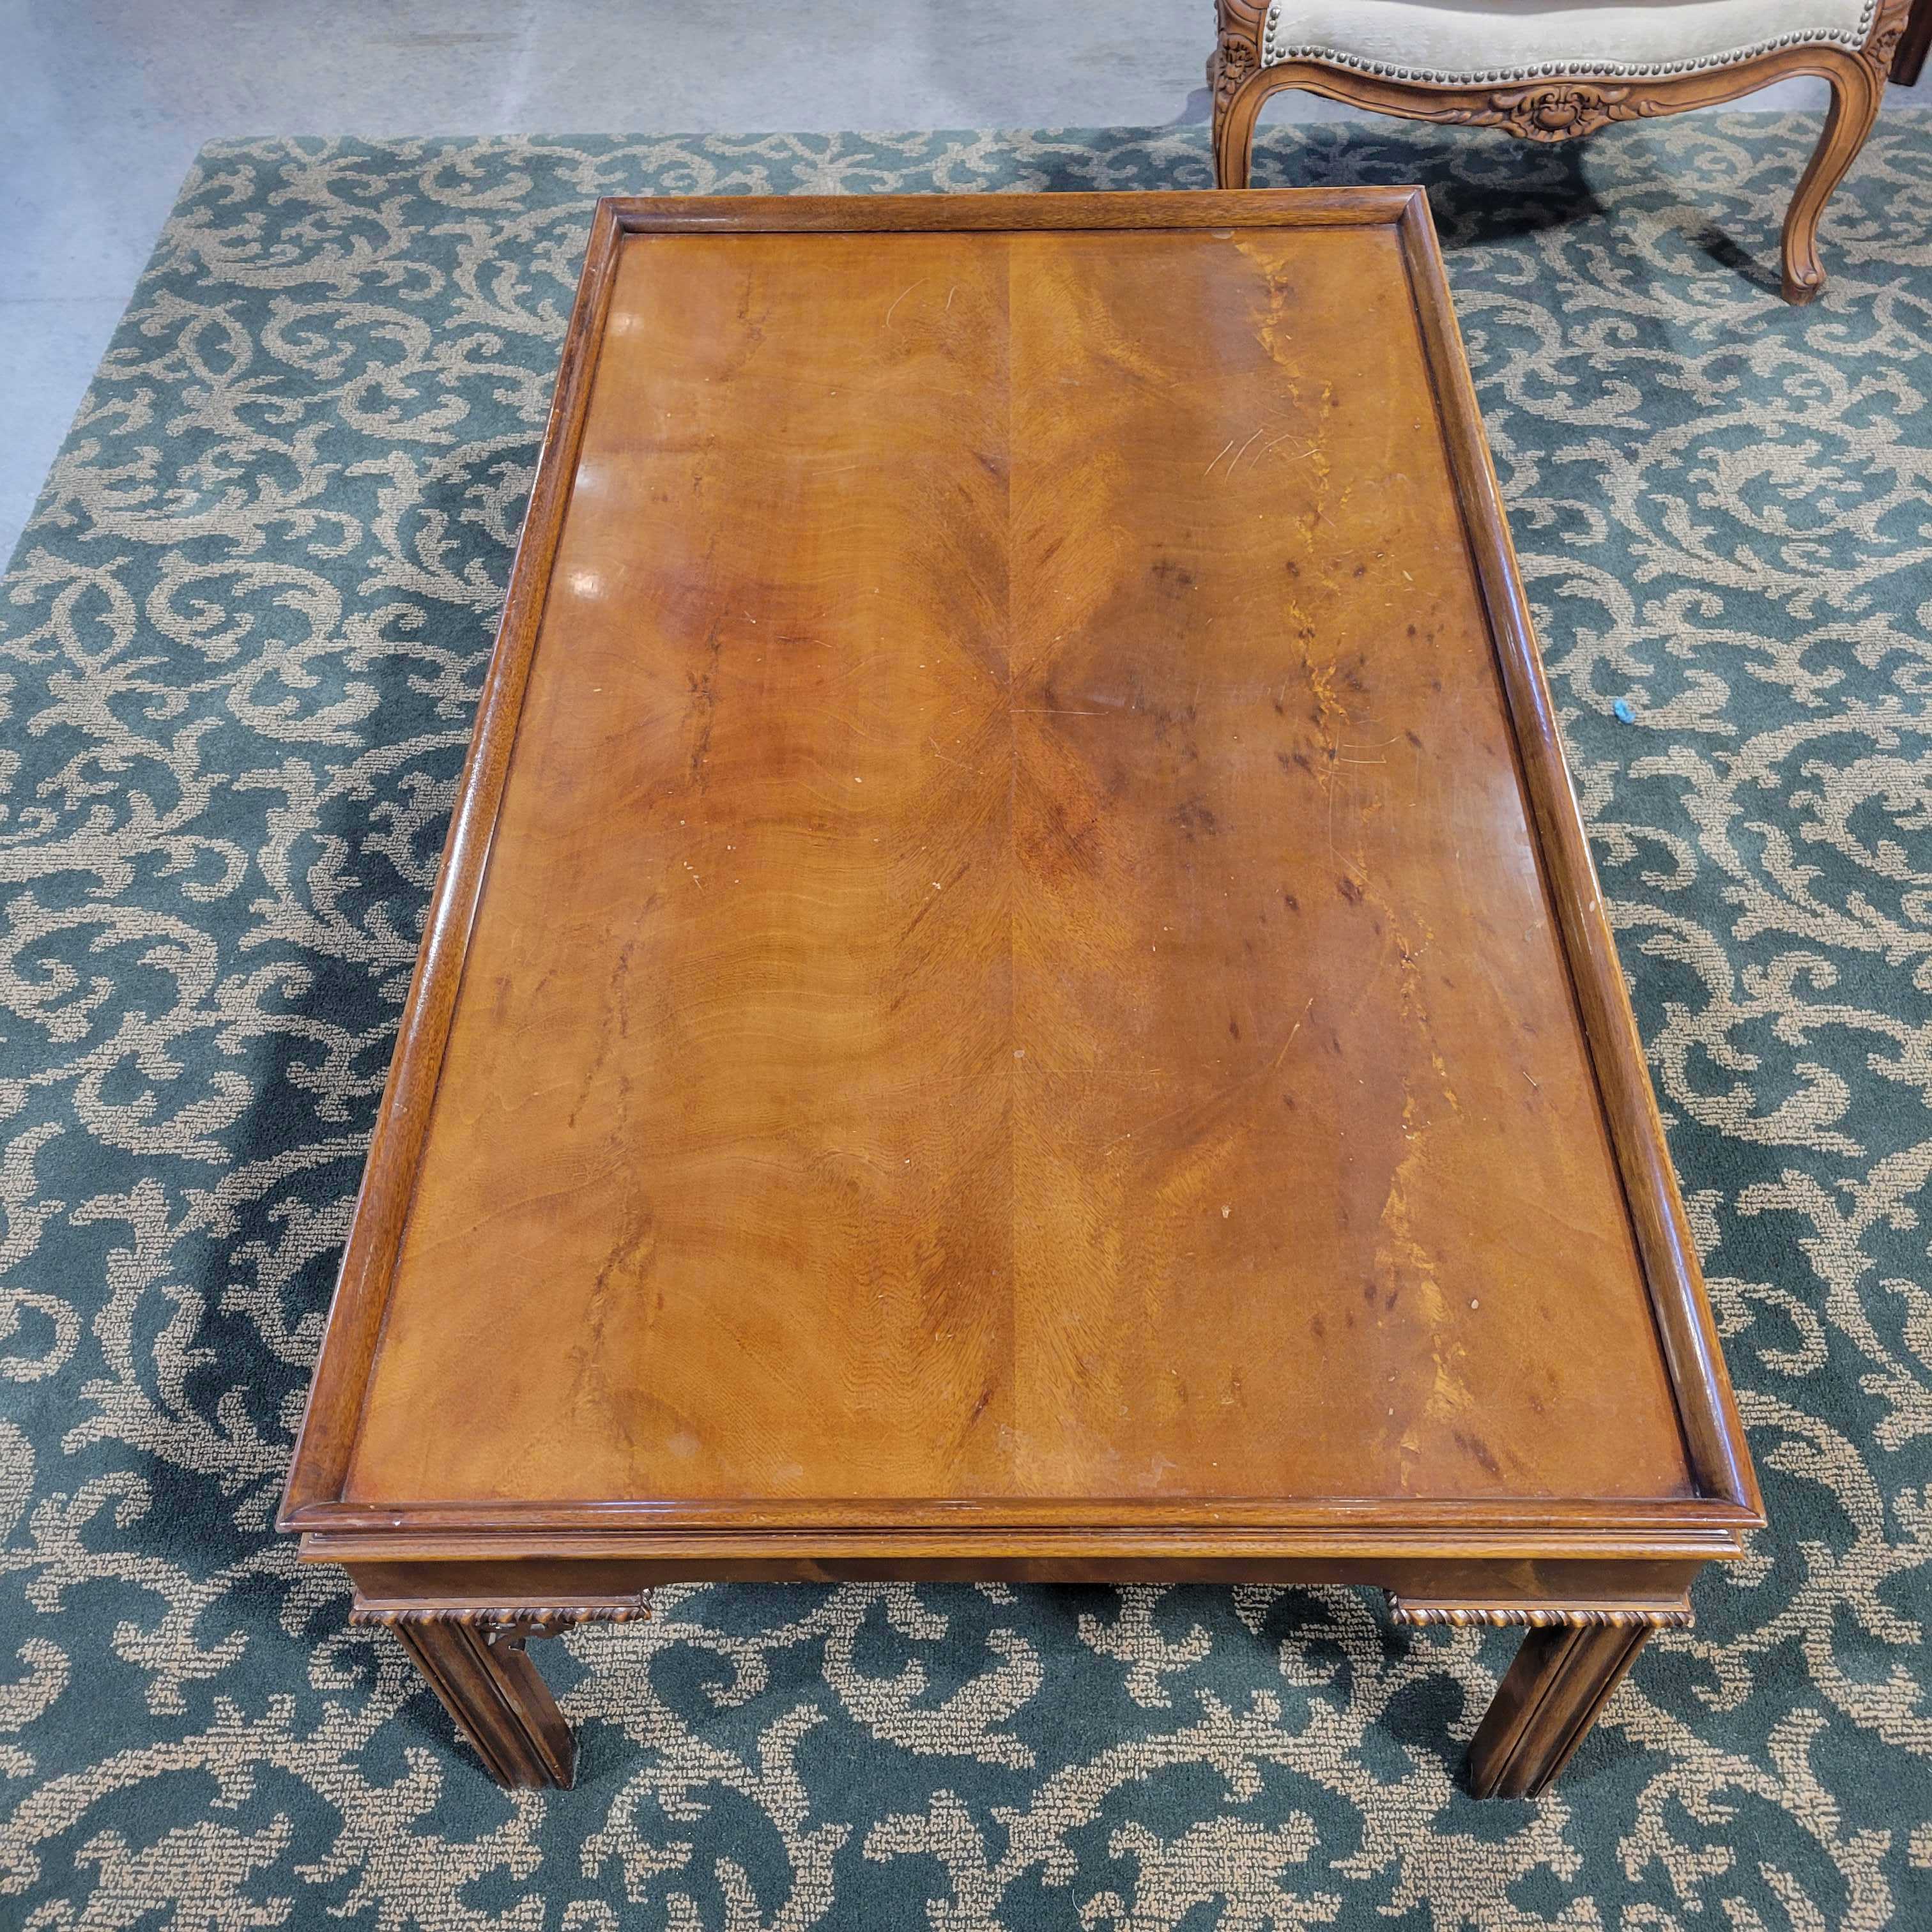 44"x 26"x 17" Hickory Chair Flamed Mahogany Few Missing Corner Embellishments Coffee Table